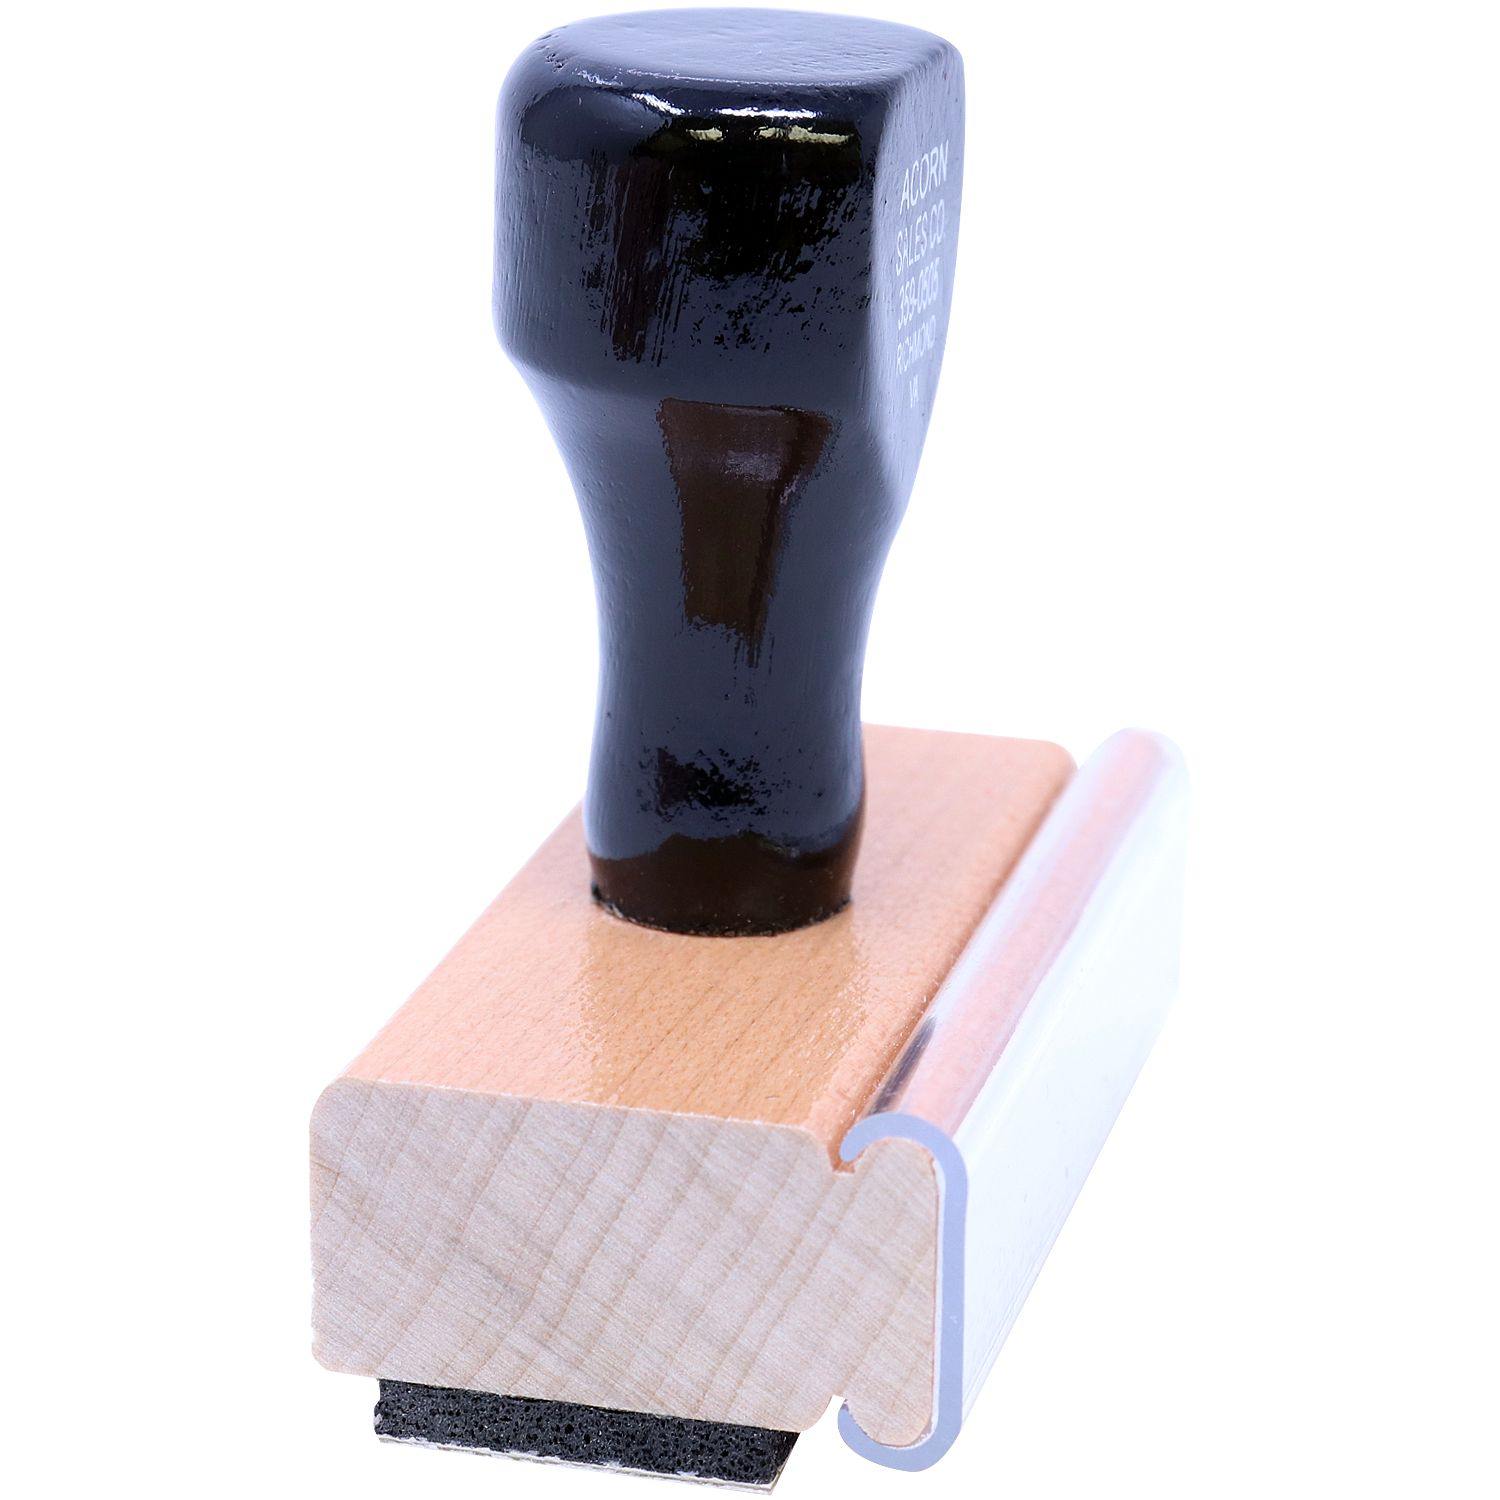 Side View of Attorneys' Copy Rubber Stamp at an Angle